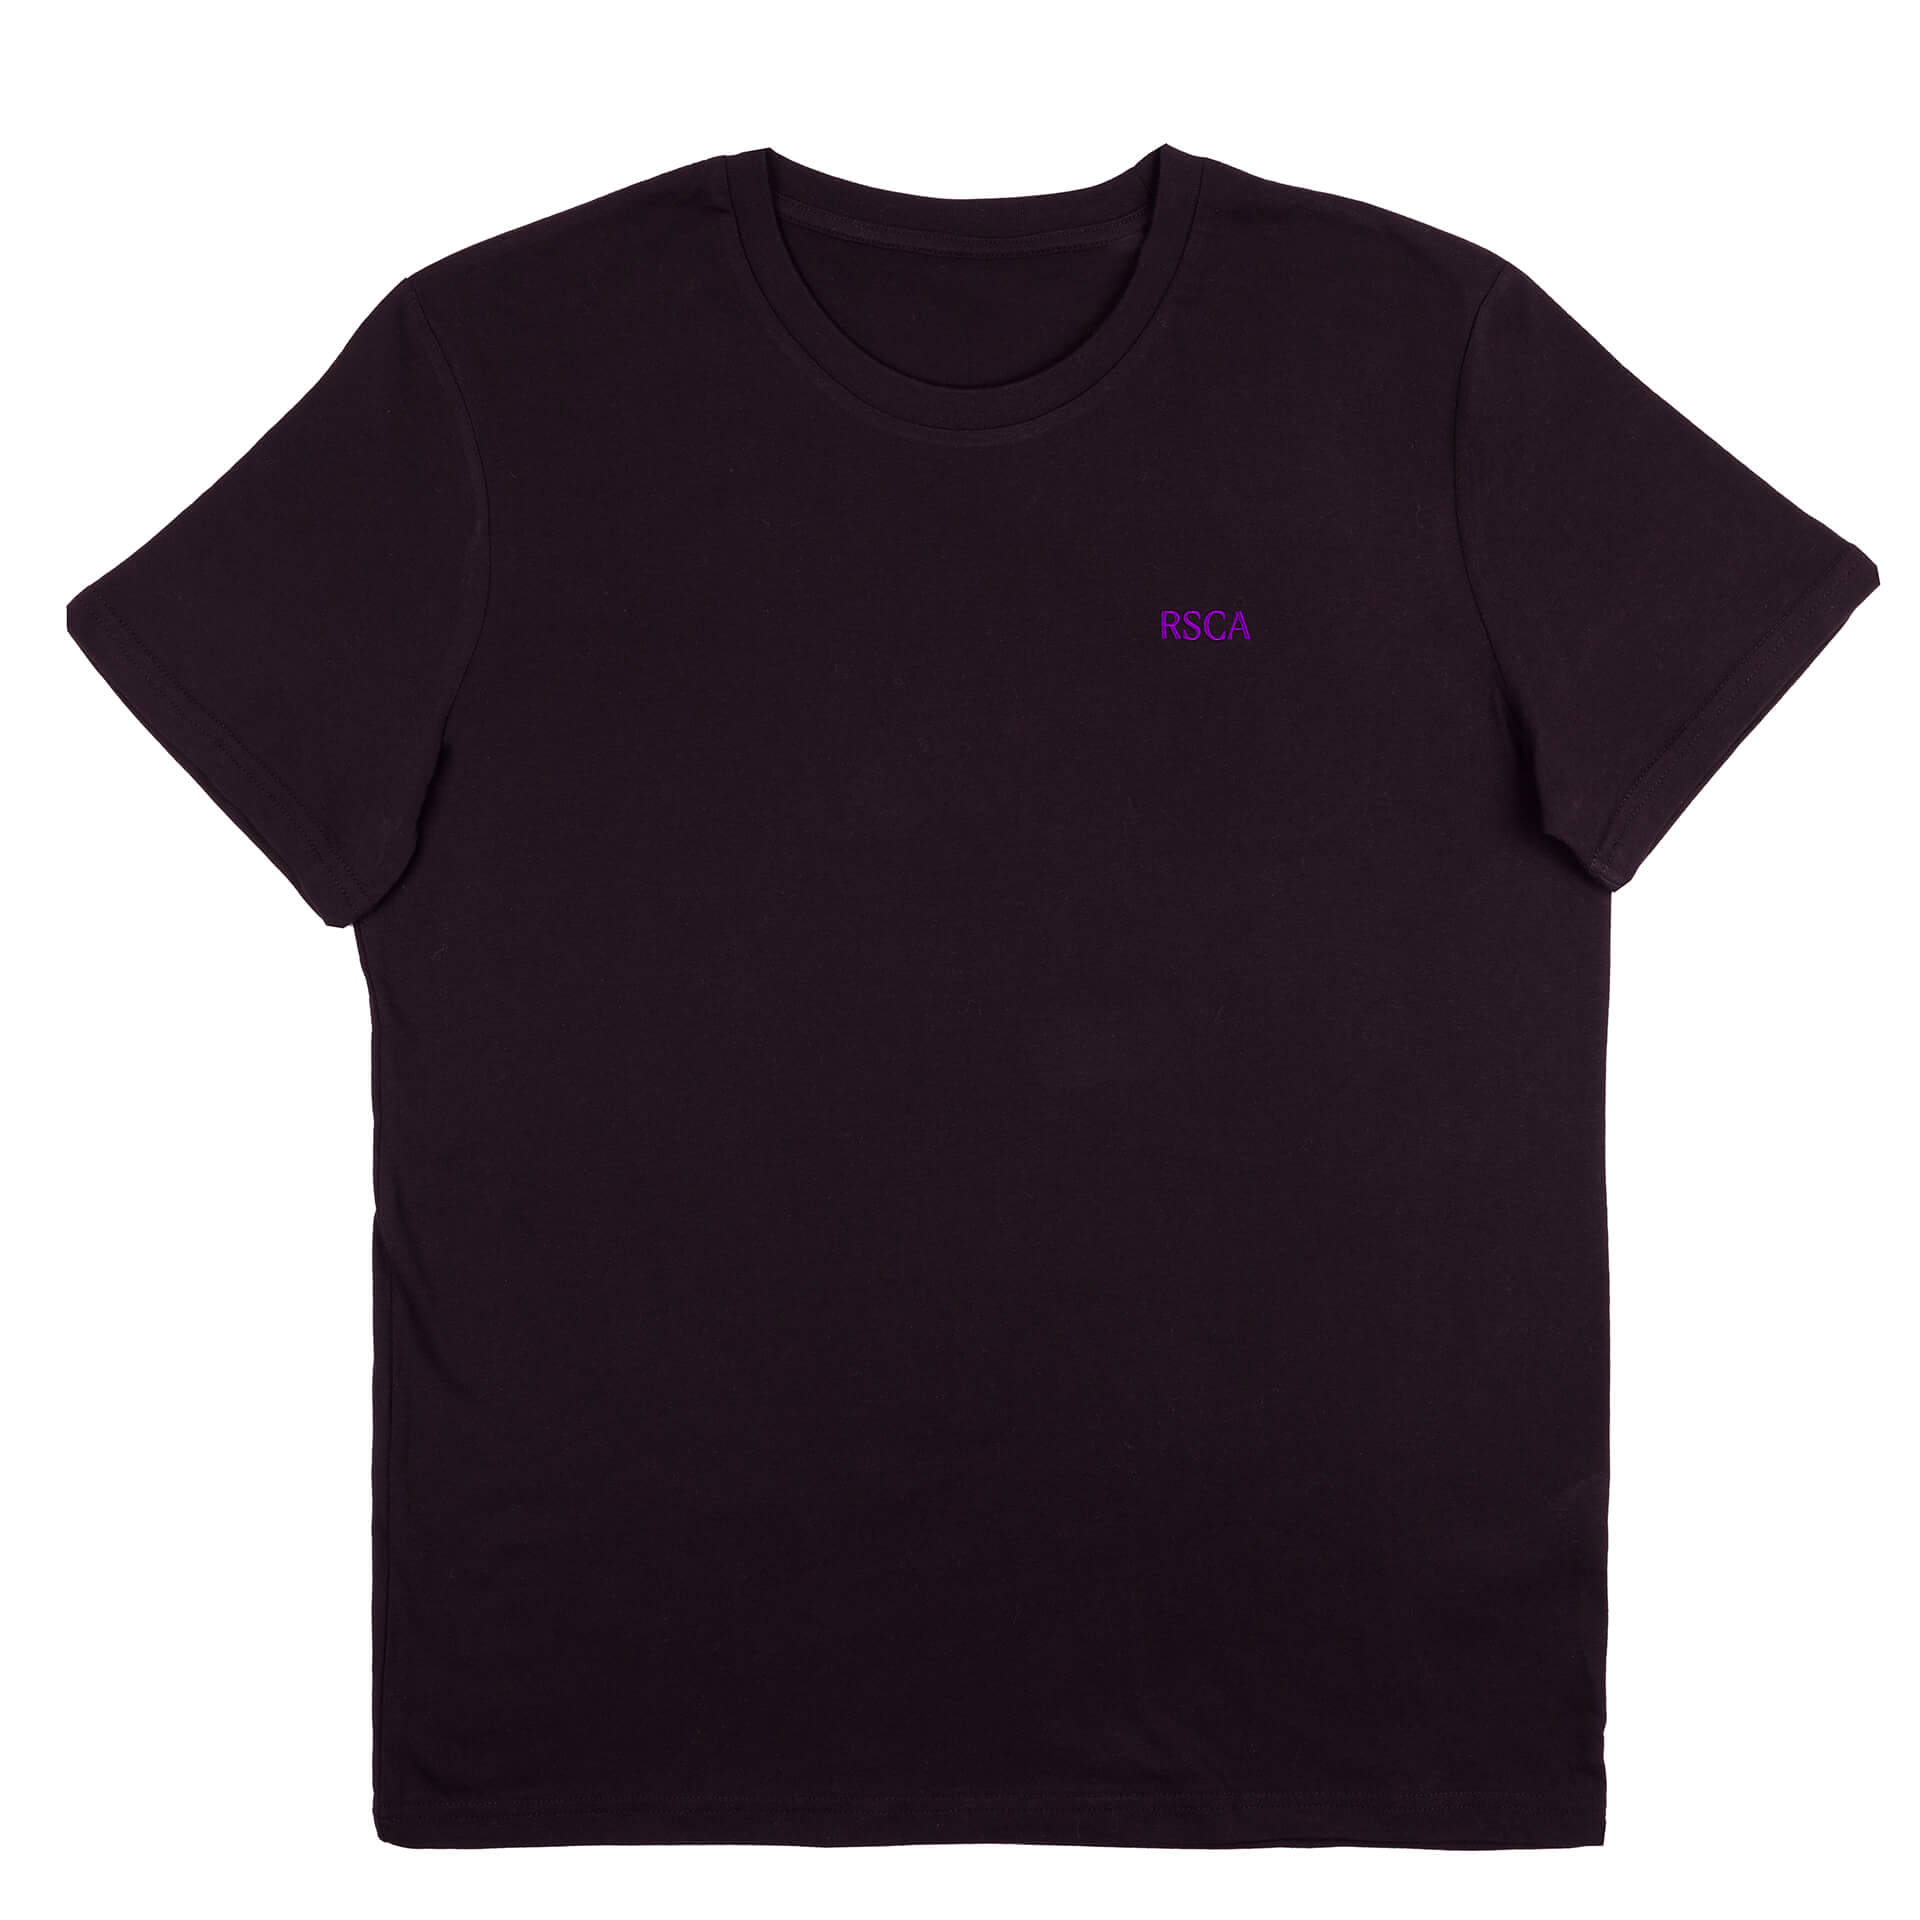 RSCA Square T-shirt black is-hover